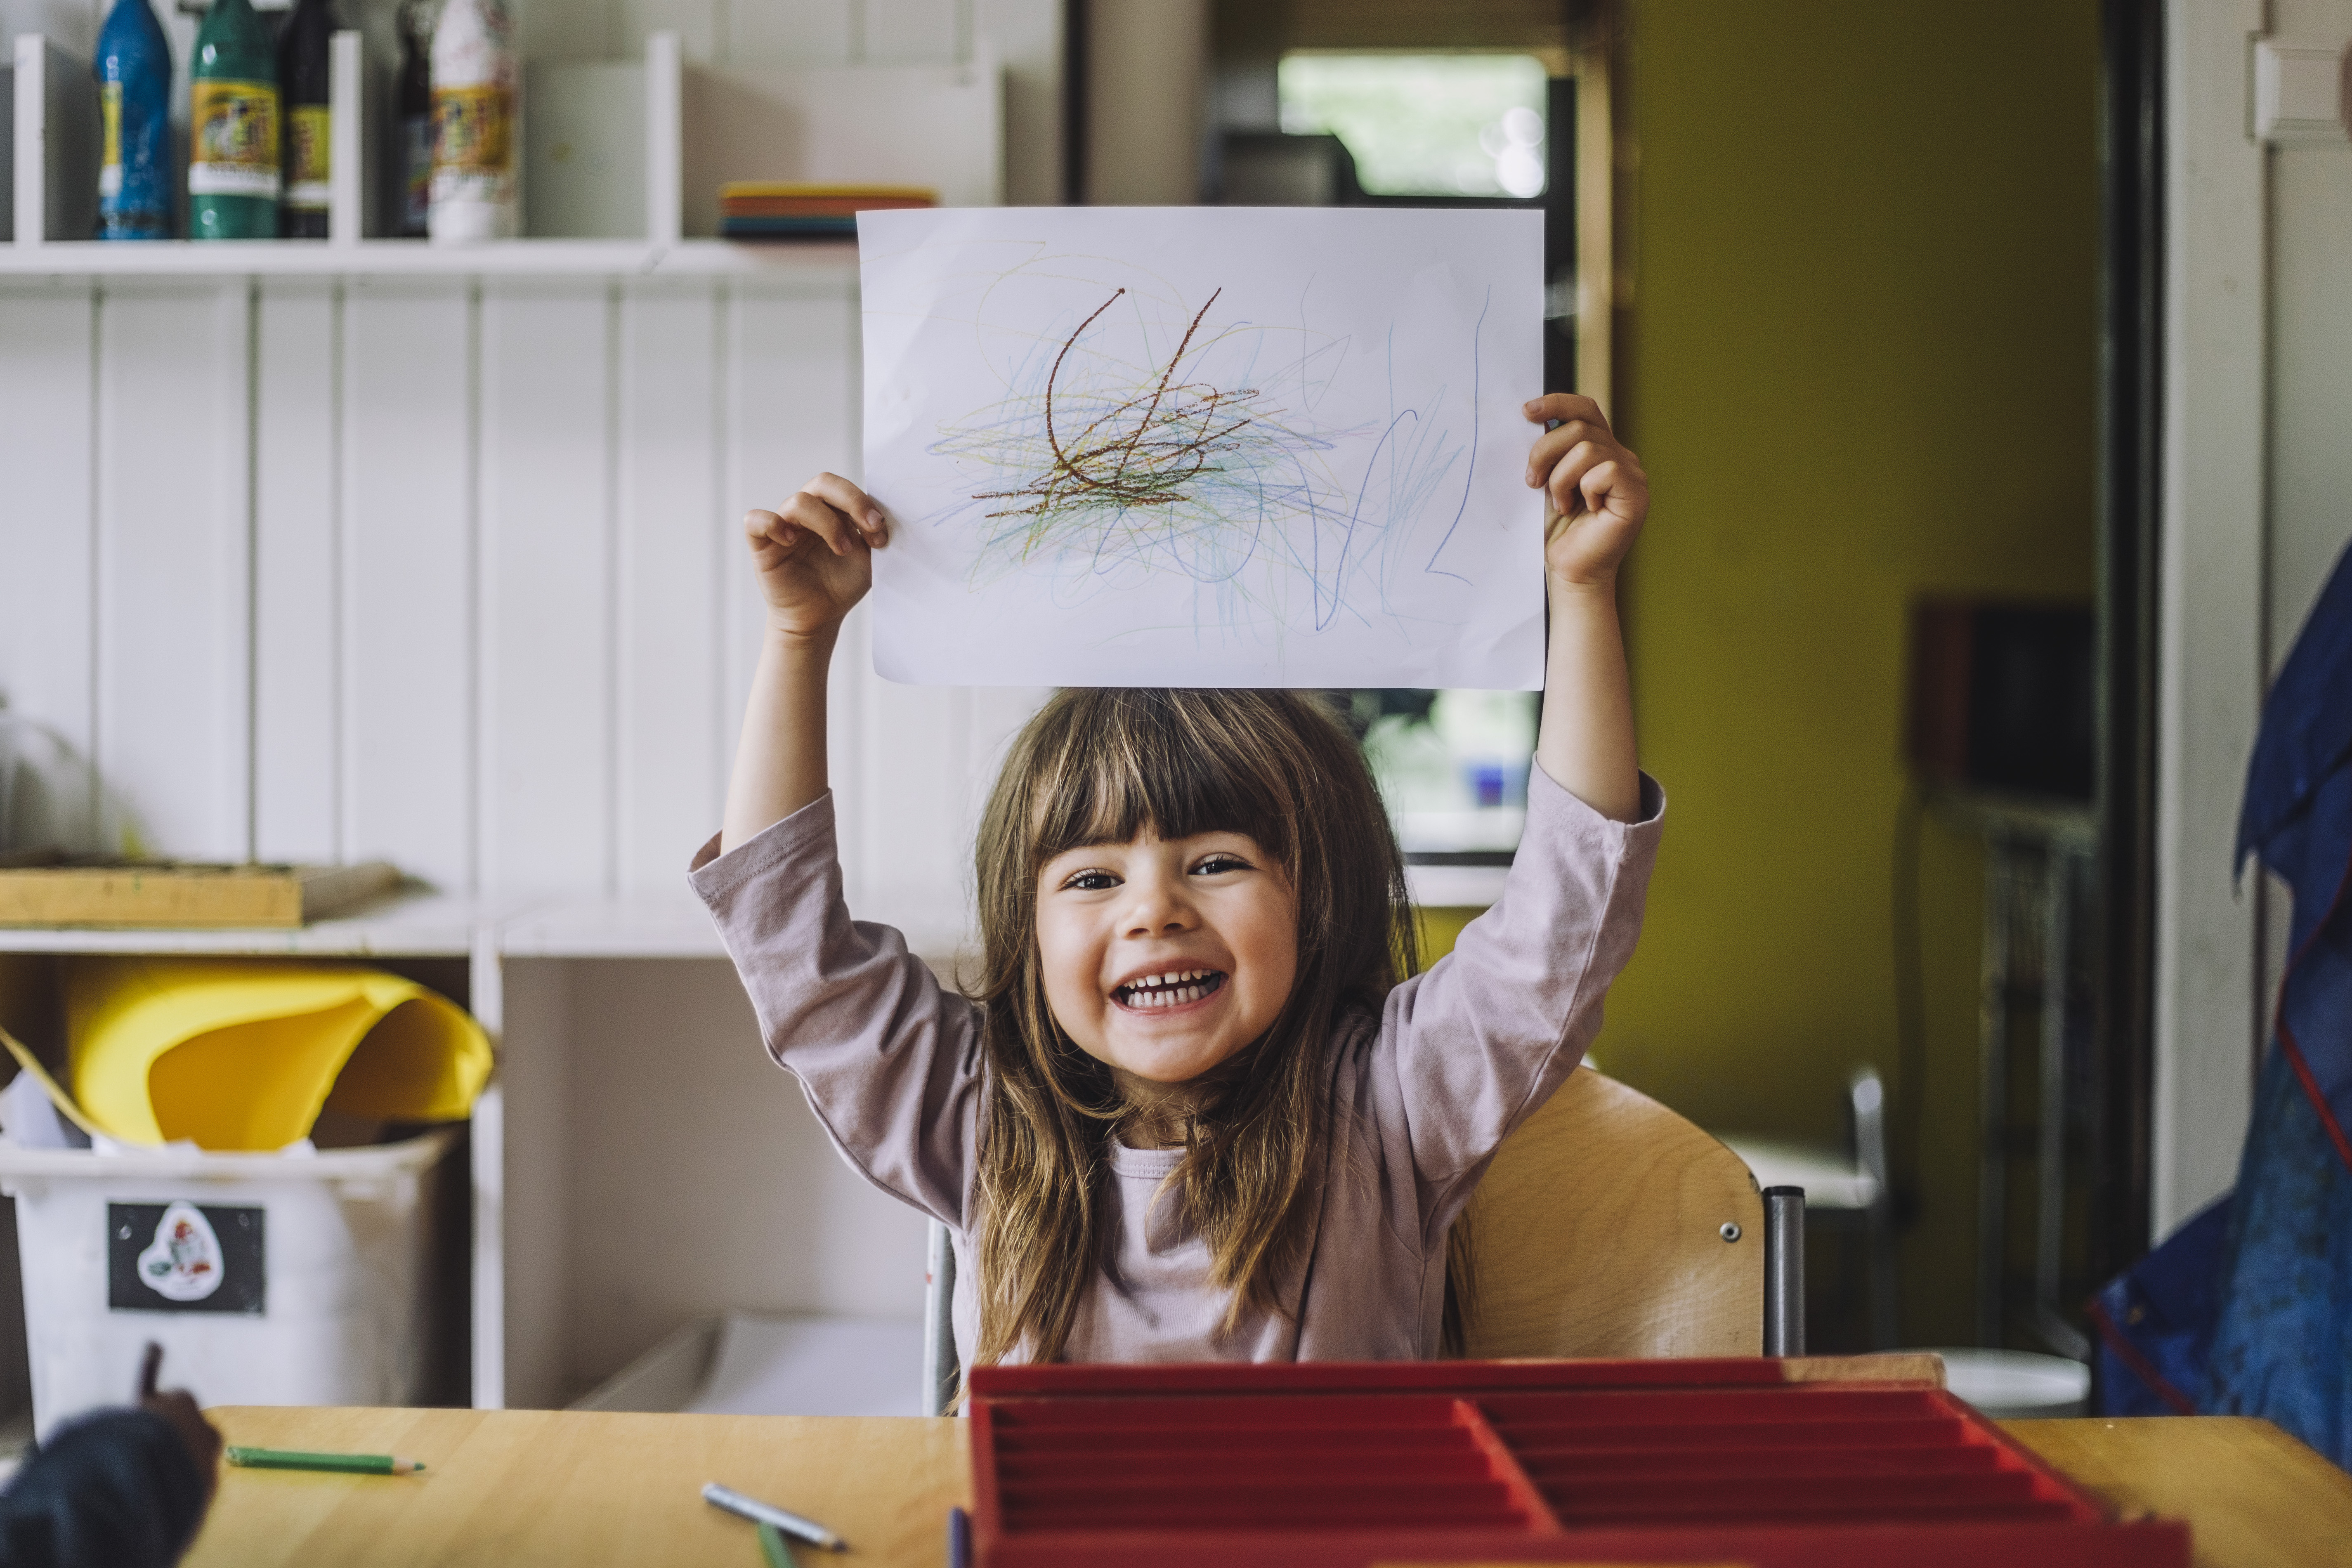 A smiling child with long brown hair holds up a paper with colorful scribbles, sitting at a table in a room with art supplies.